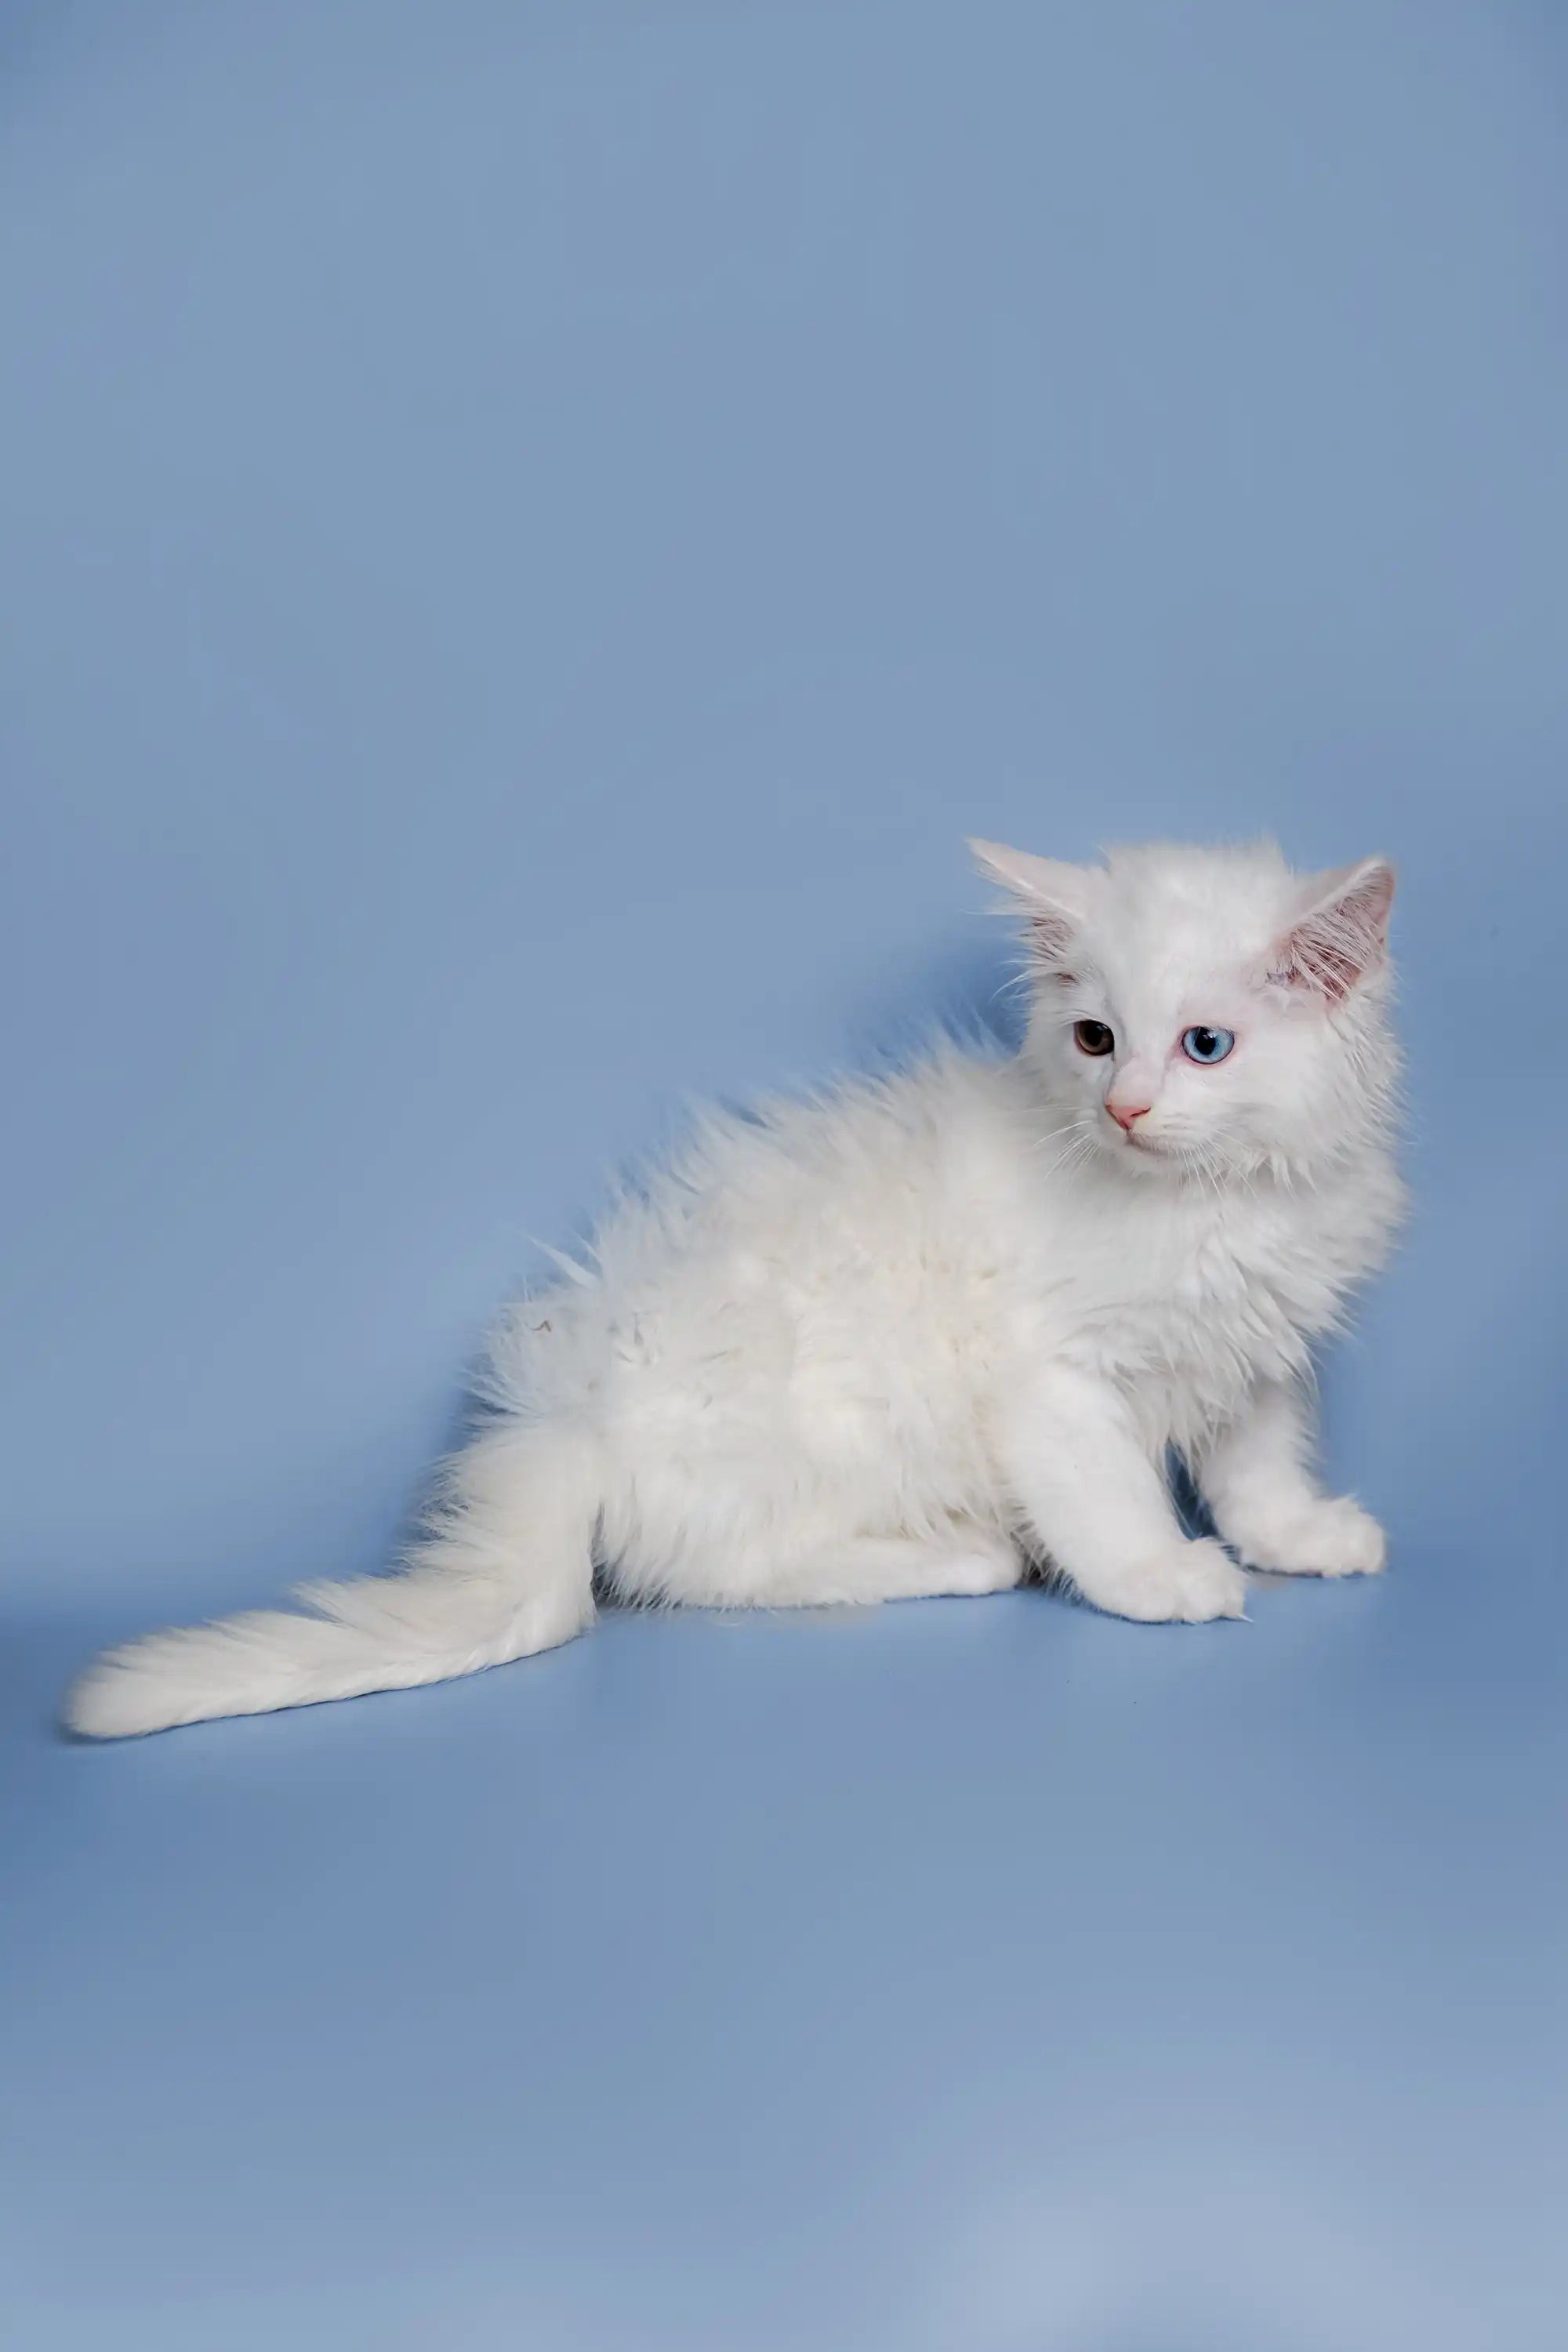 Maine Coon Kittens for Sale Diana | Kitten